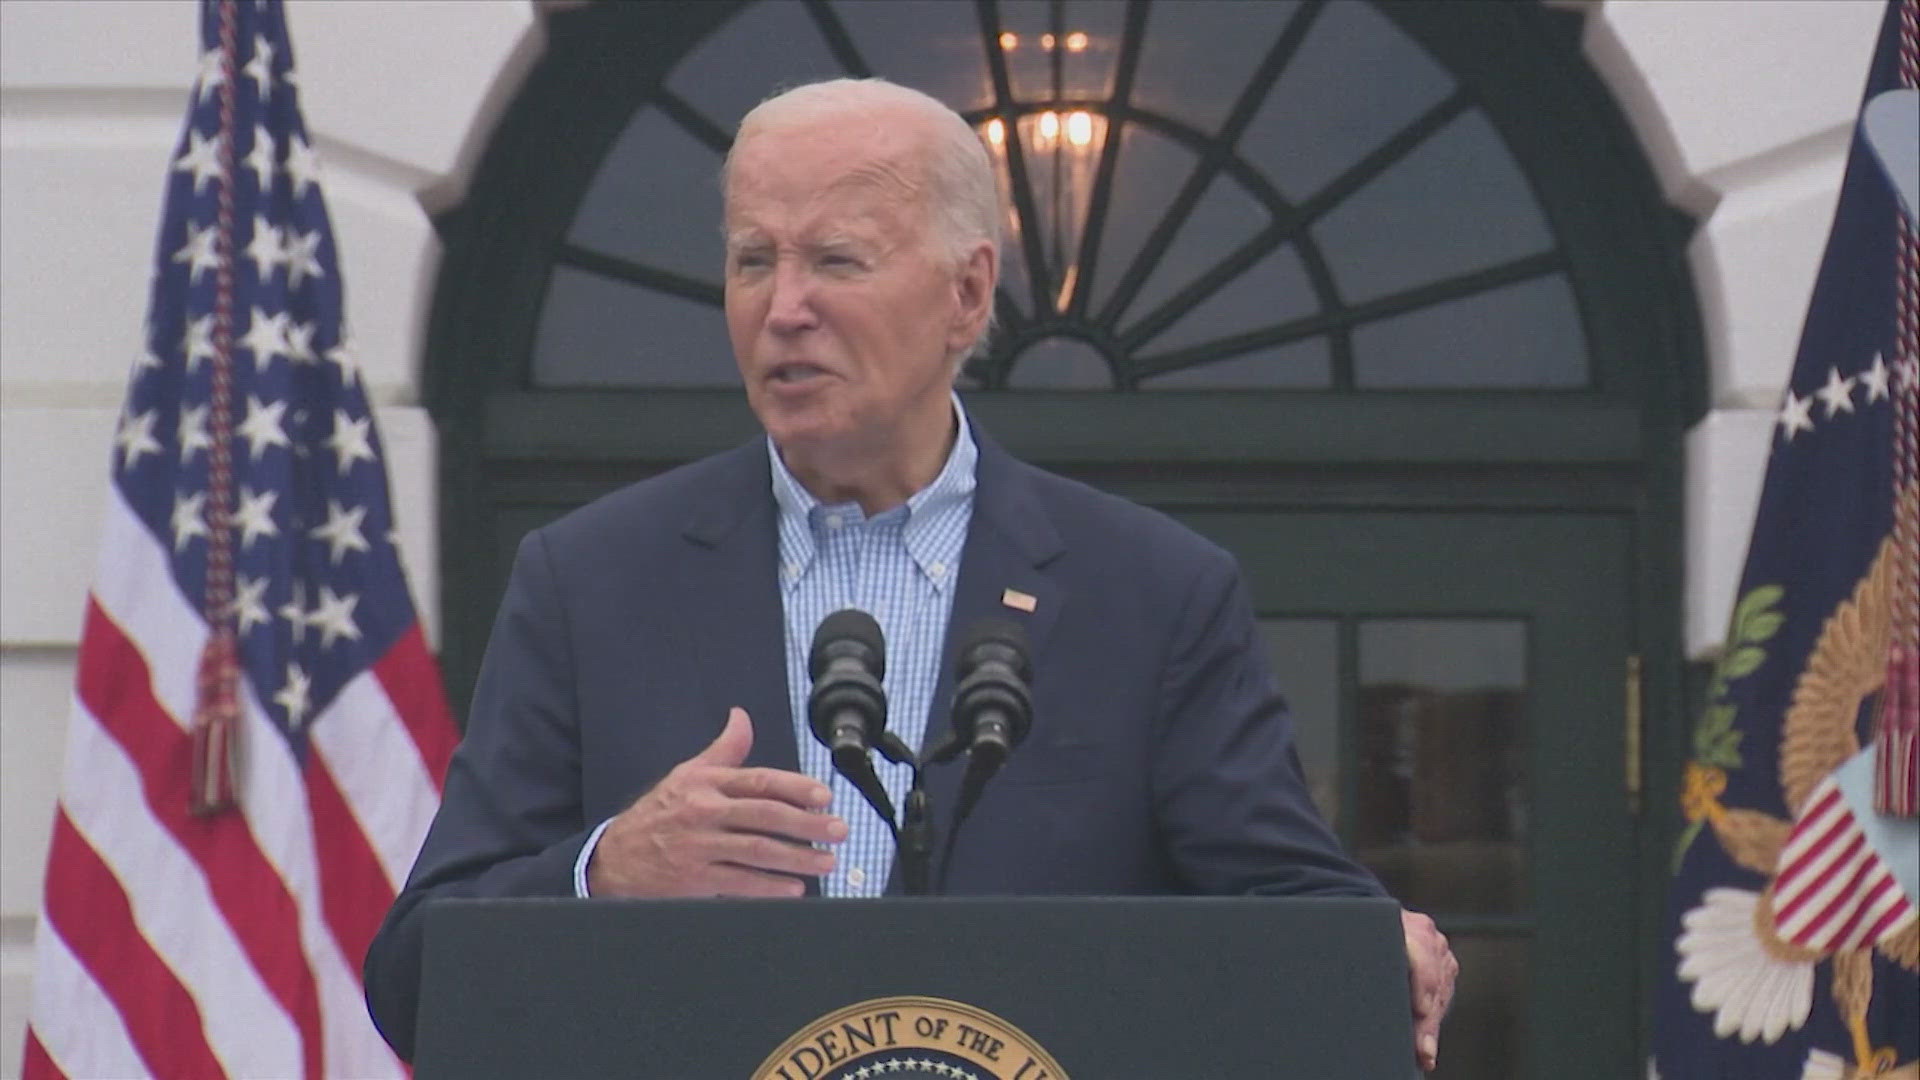 Biden will sit down for an interview with ABC's George Stephanopoulos tonight.